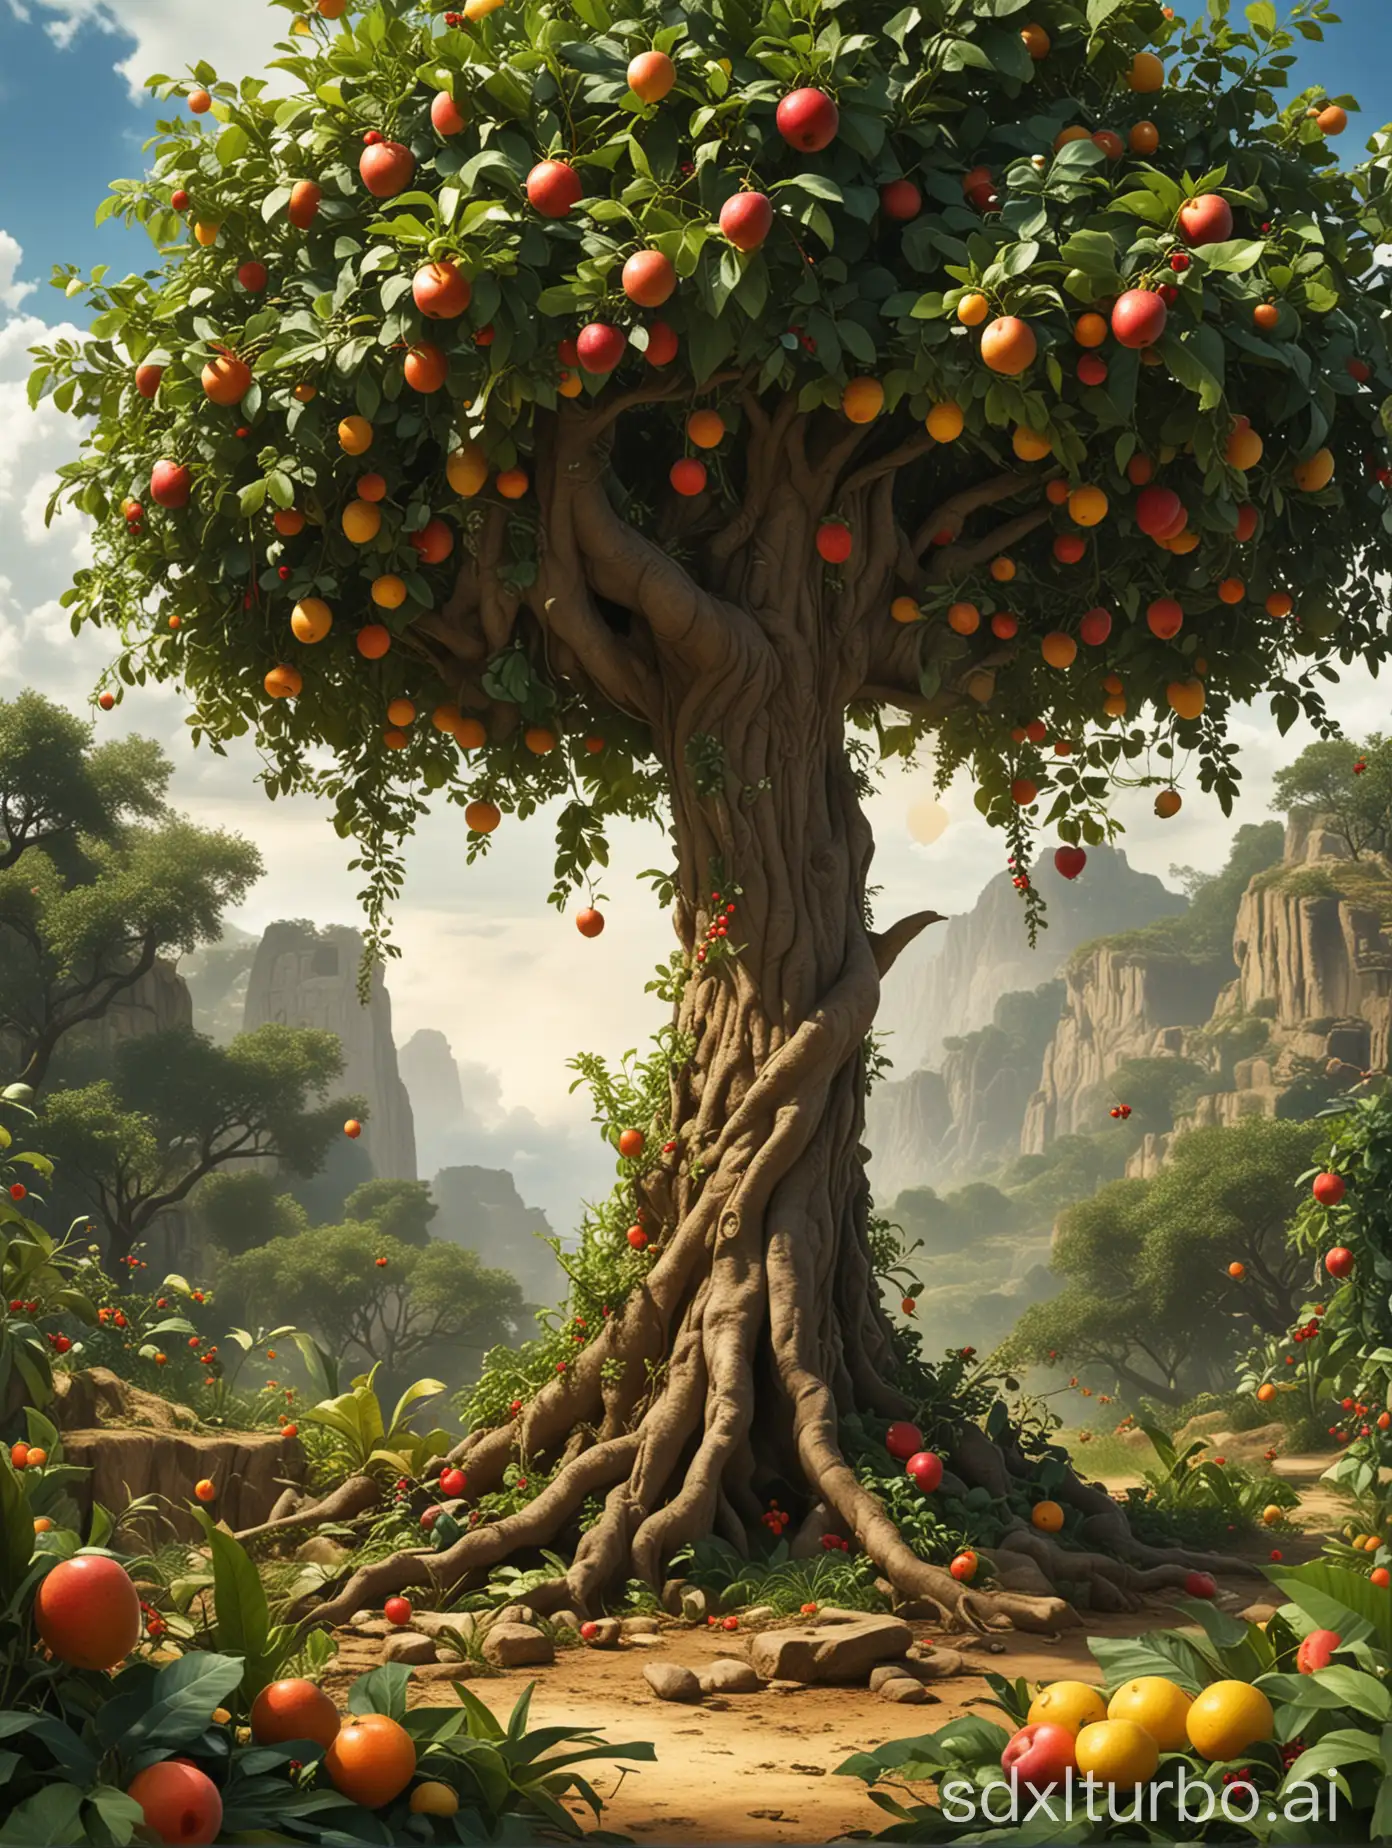 the Garden of Eden in the Bible, banner, scene, cartoon, a tree, a few fruits on the tree, no characters, and grass.